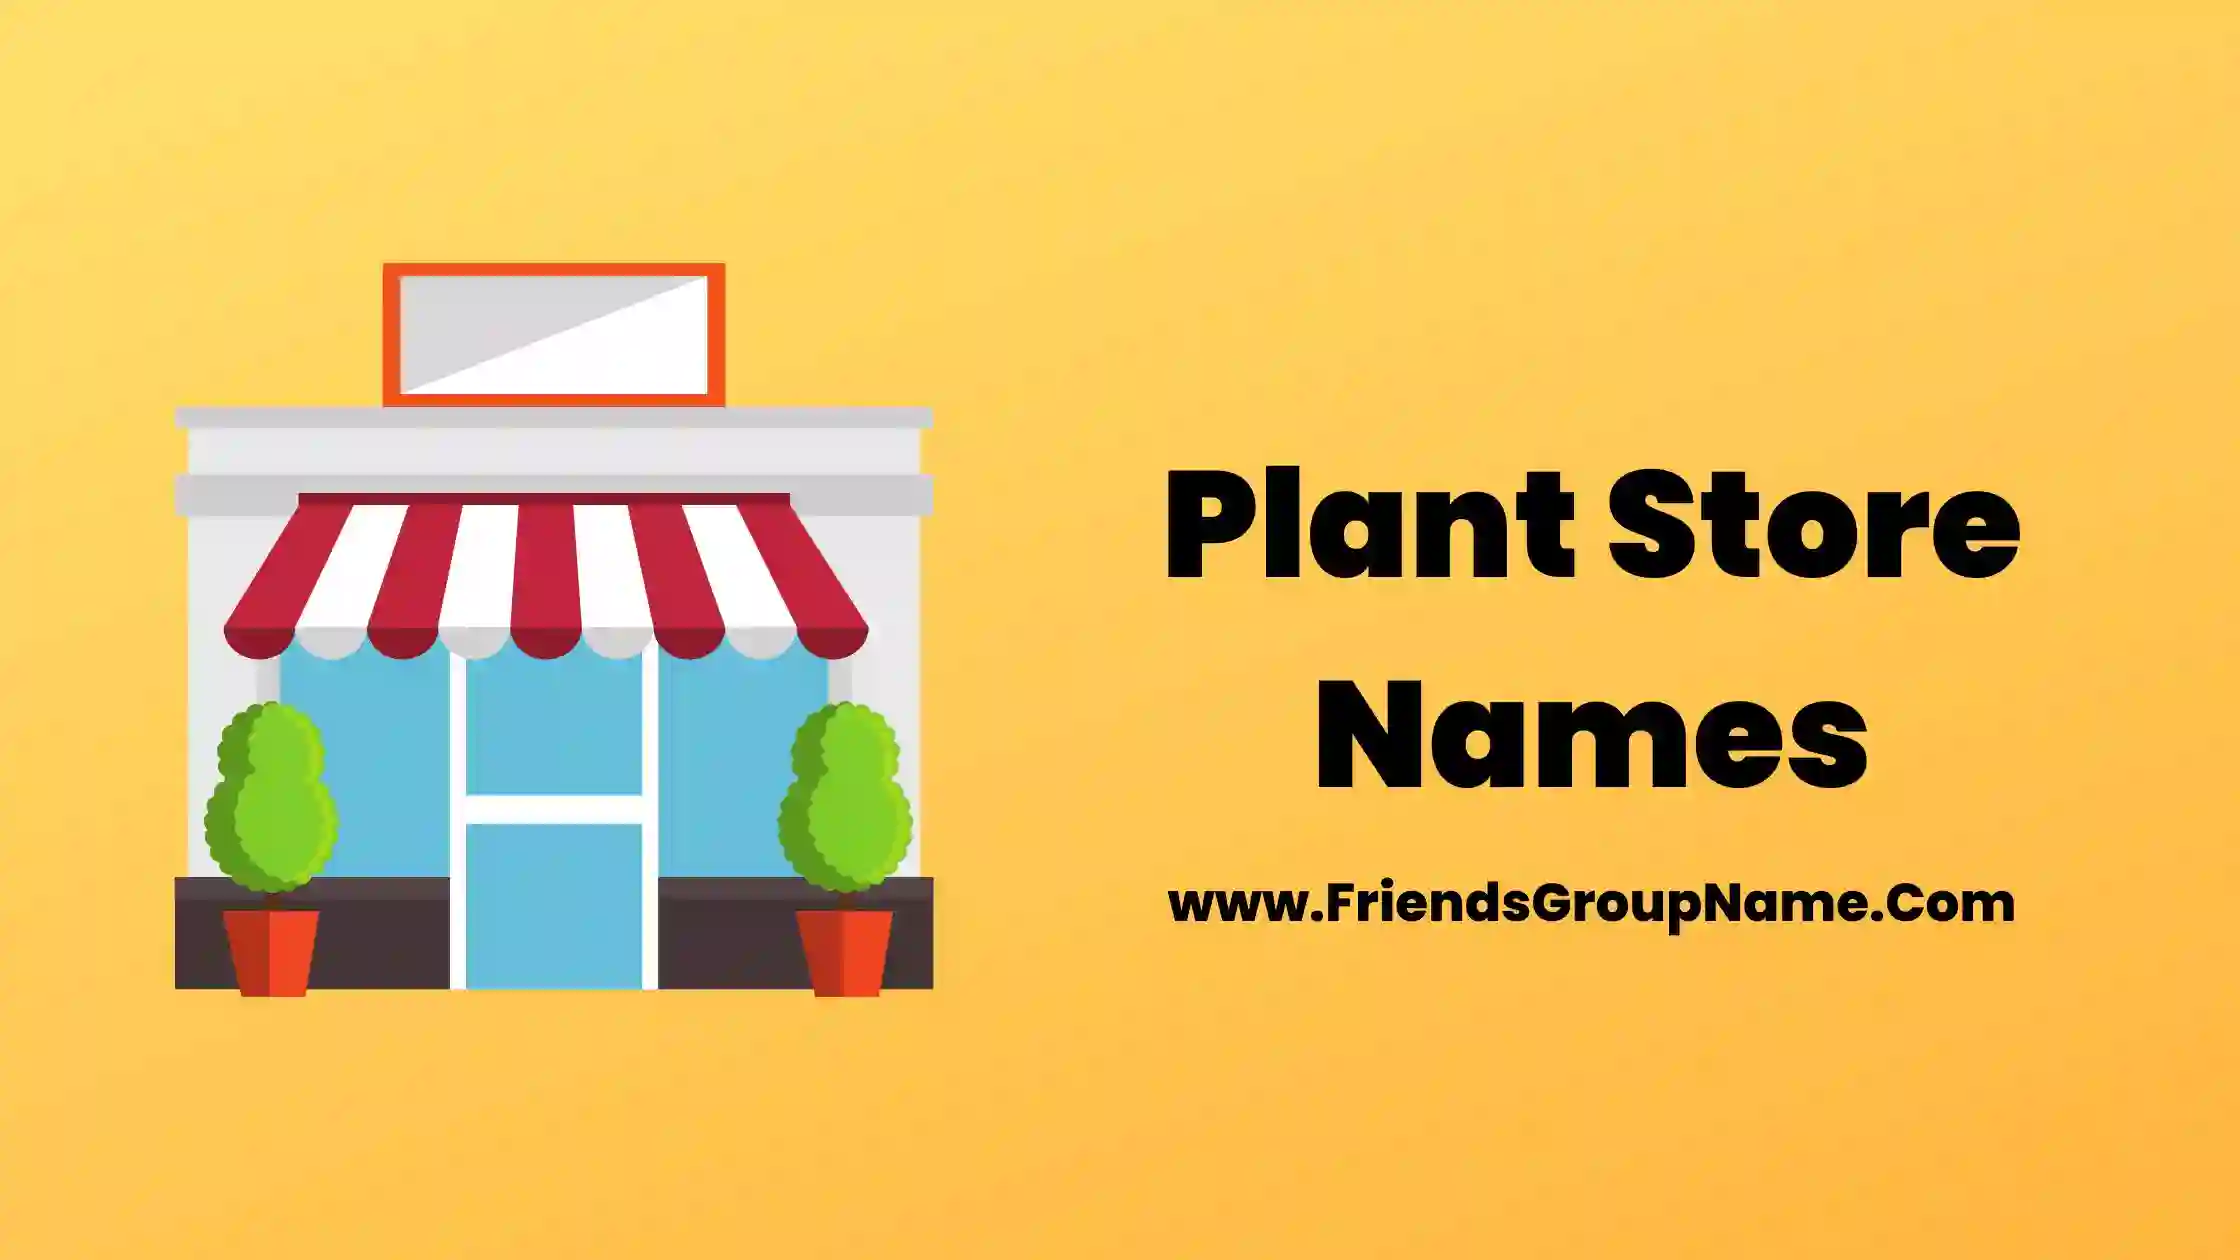 Plant Store Names